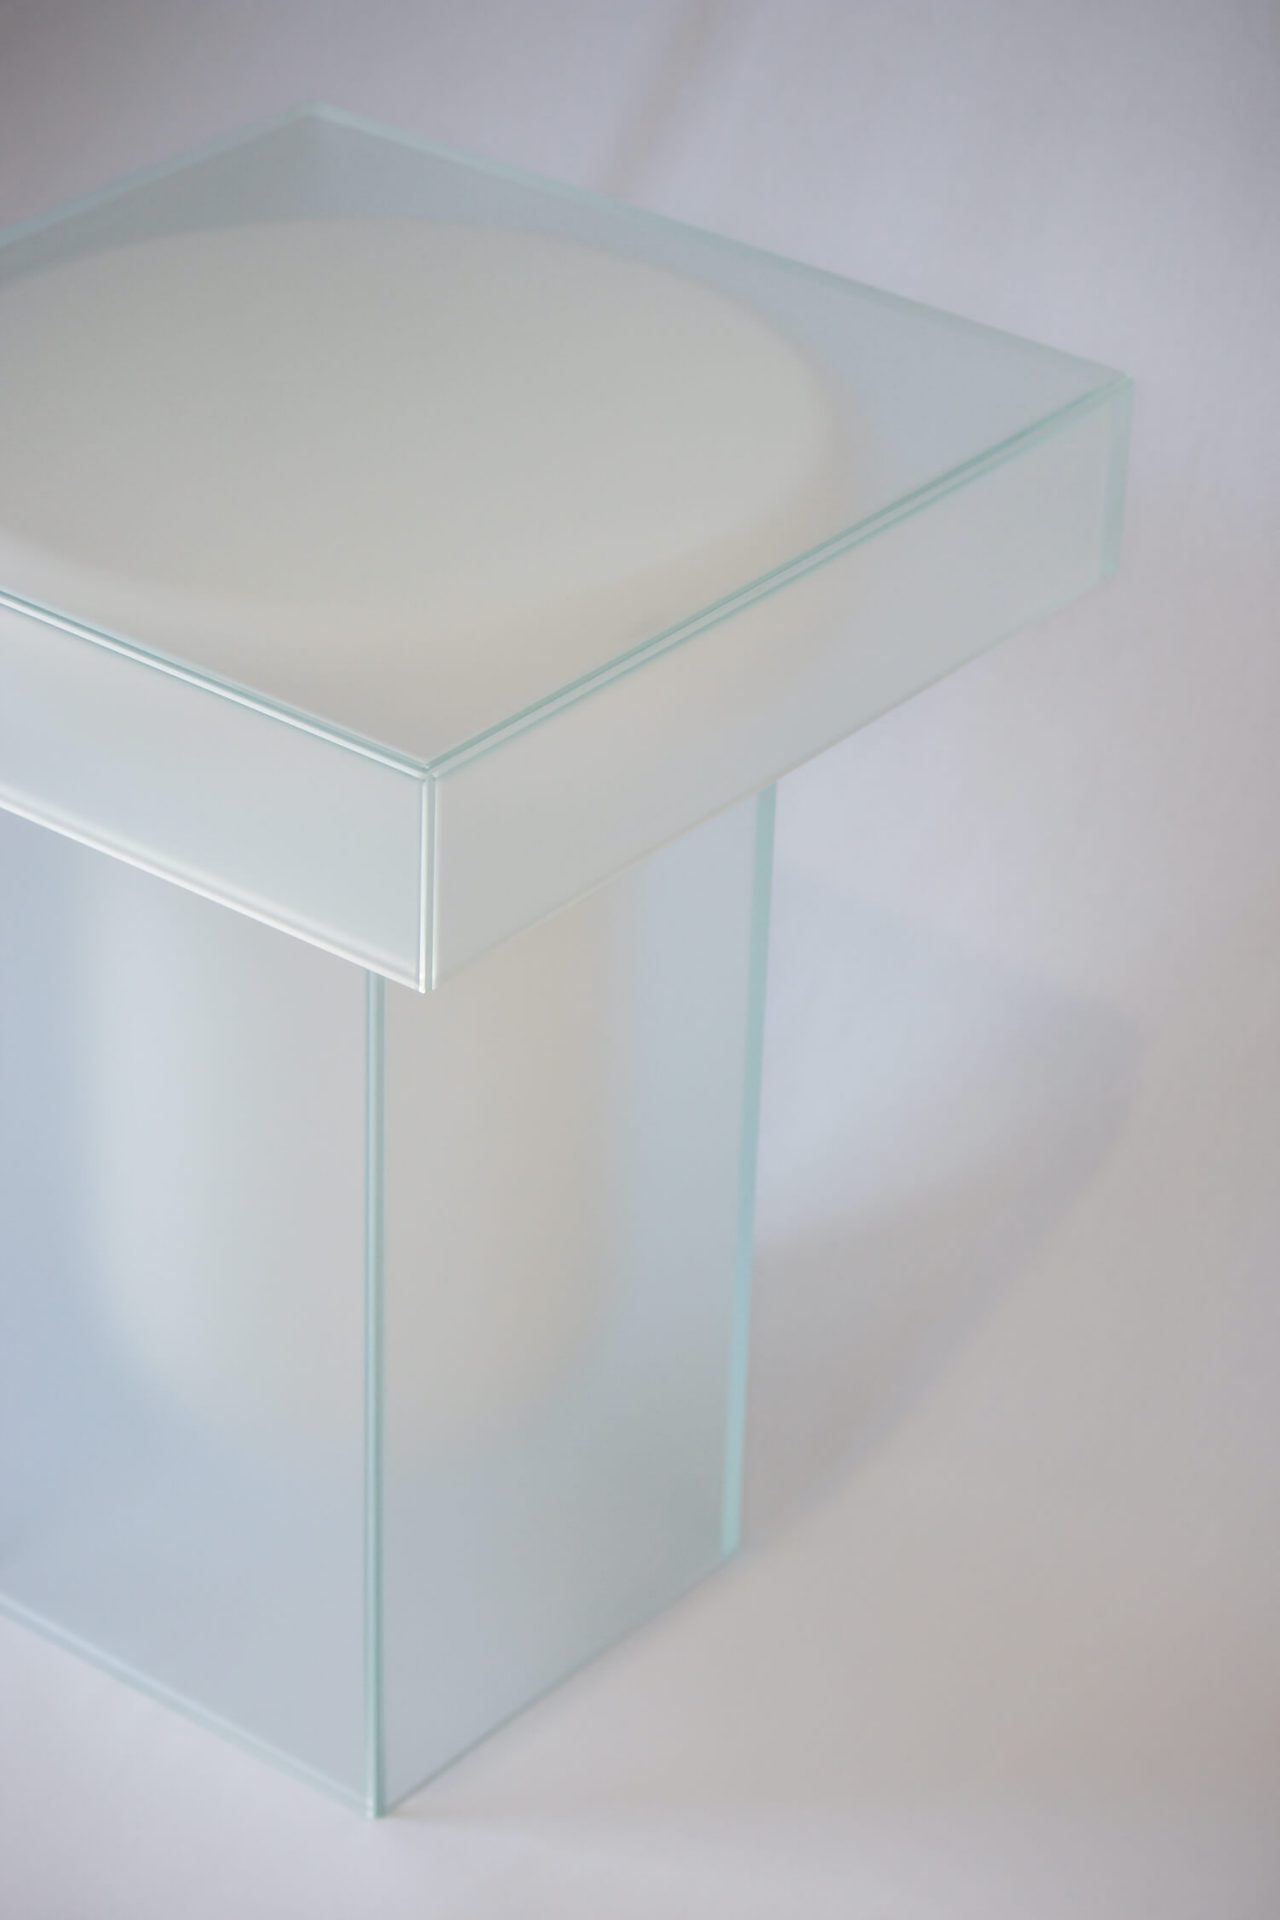 CONTAINA - visisble table-within-a-white table